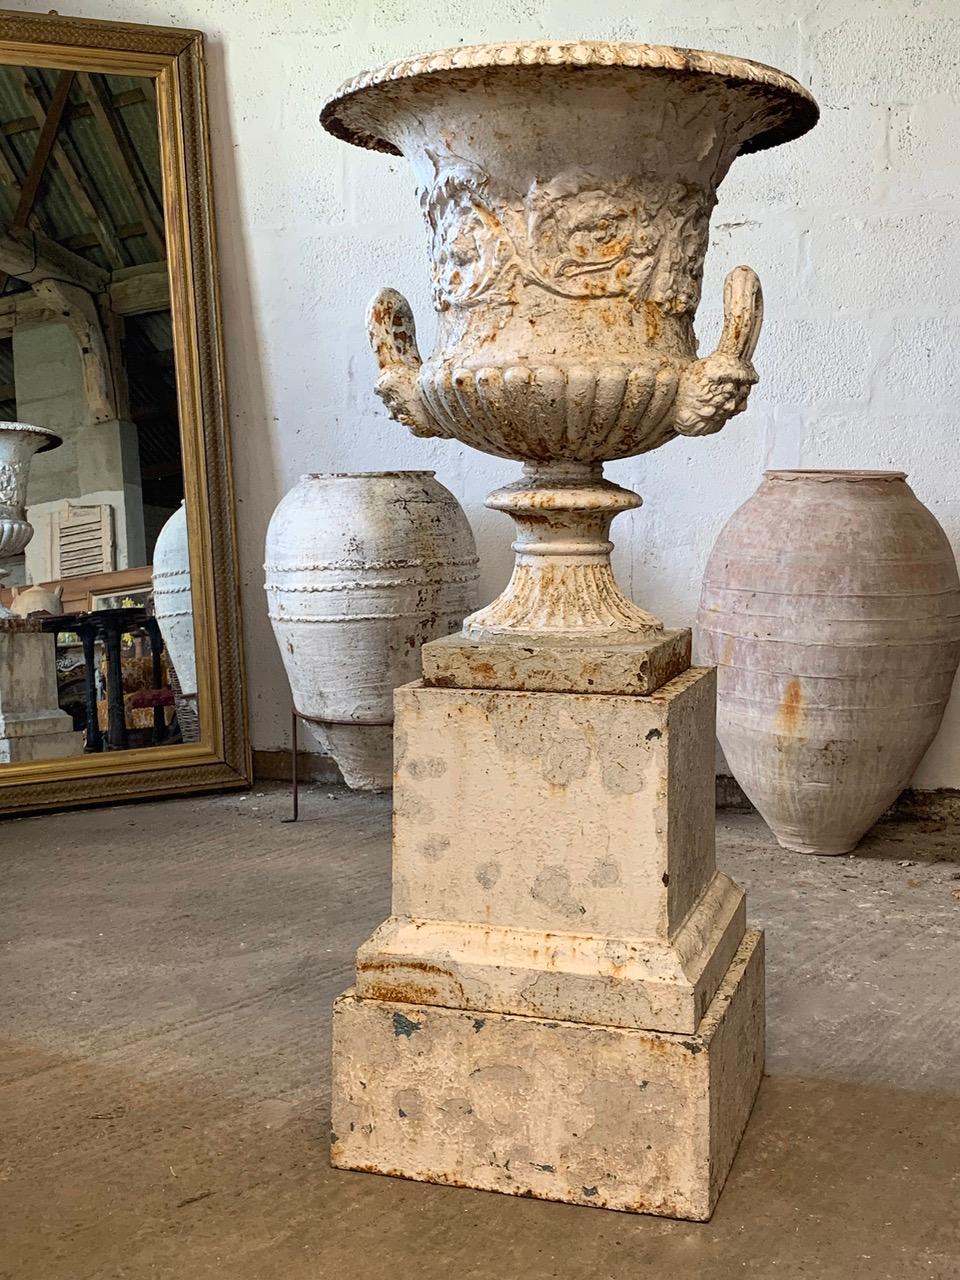 An impressive 19th century double handled cast iron urn by the Handyside Foundry. Standing on its original iron plinth which is in 2 parts. It is a good size and will make a nice center piece in the garden. With nice old weathered paint which adds